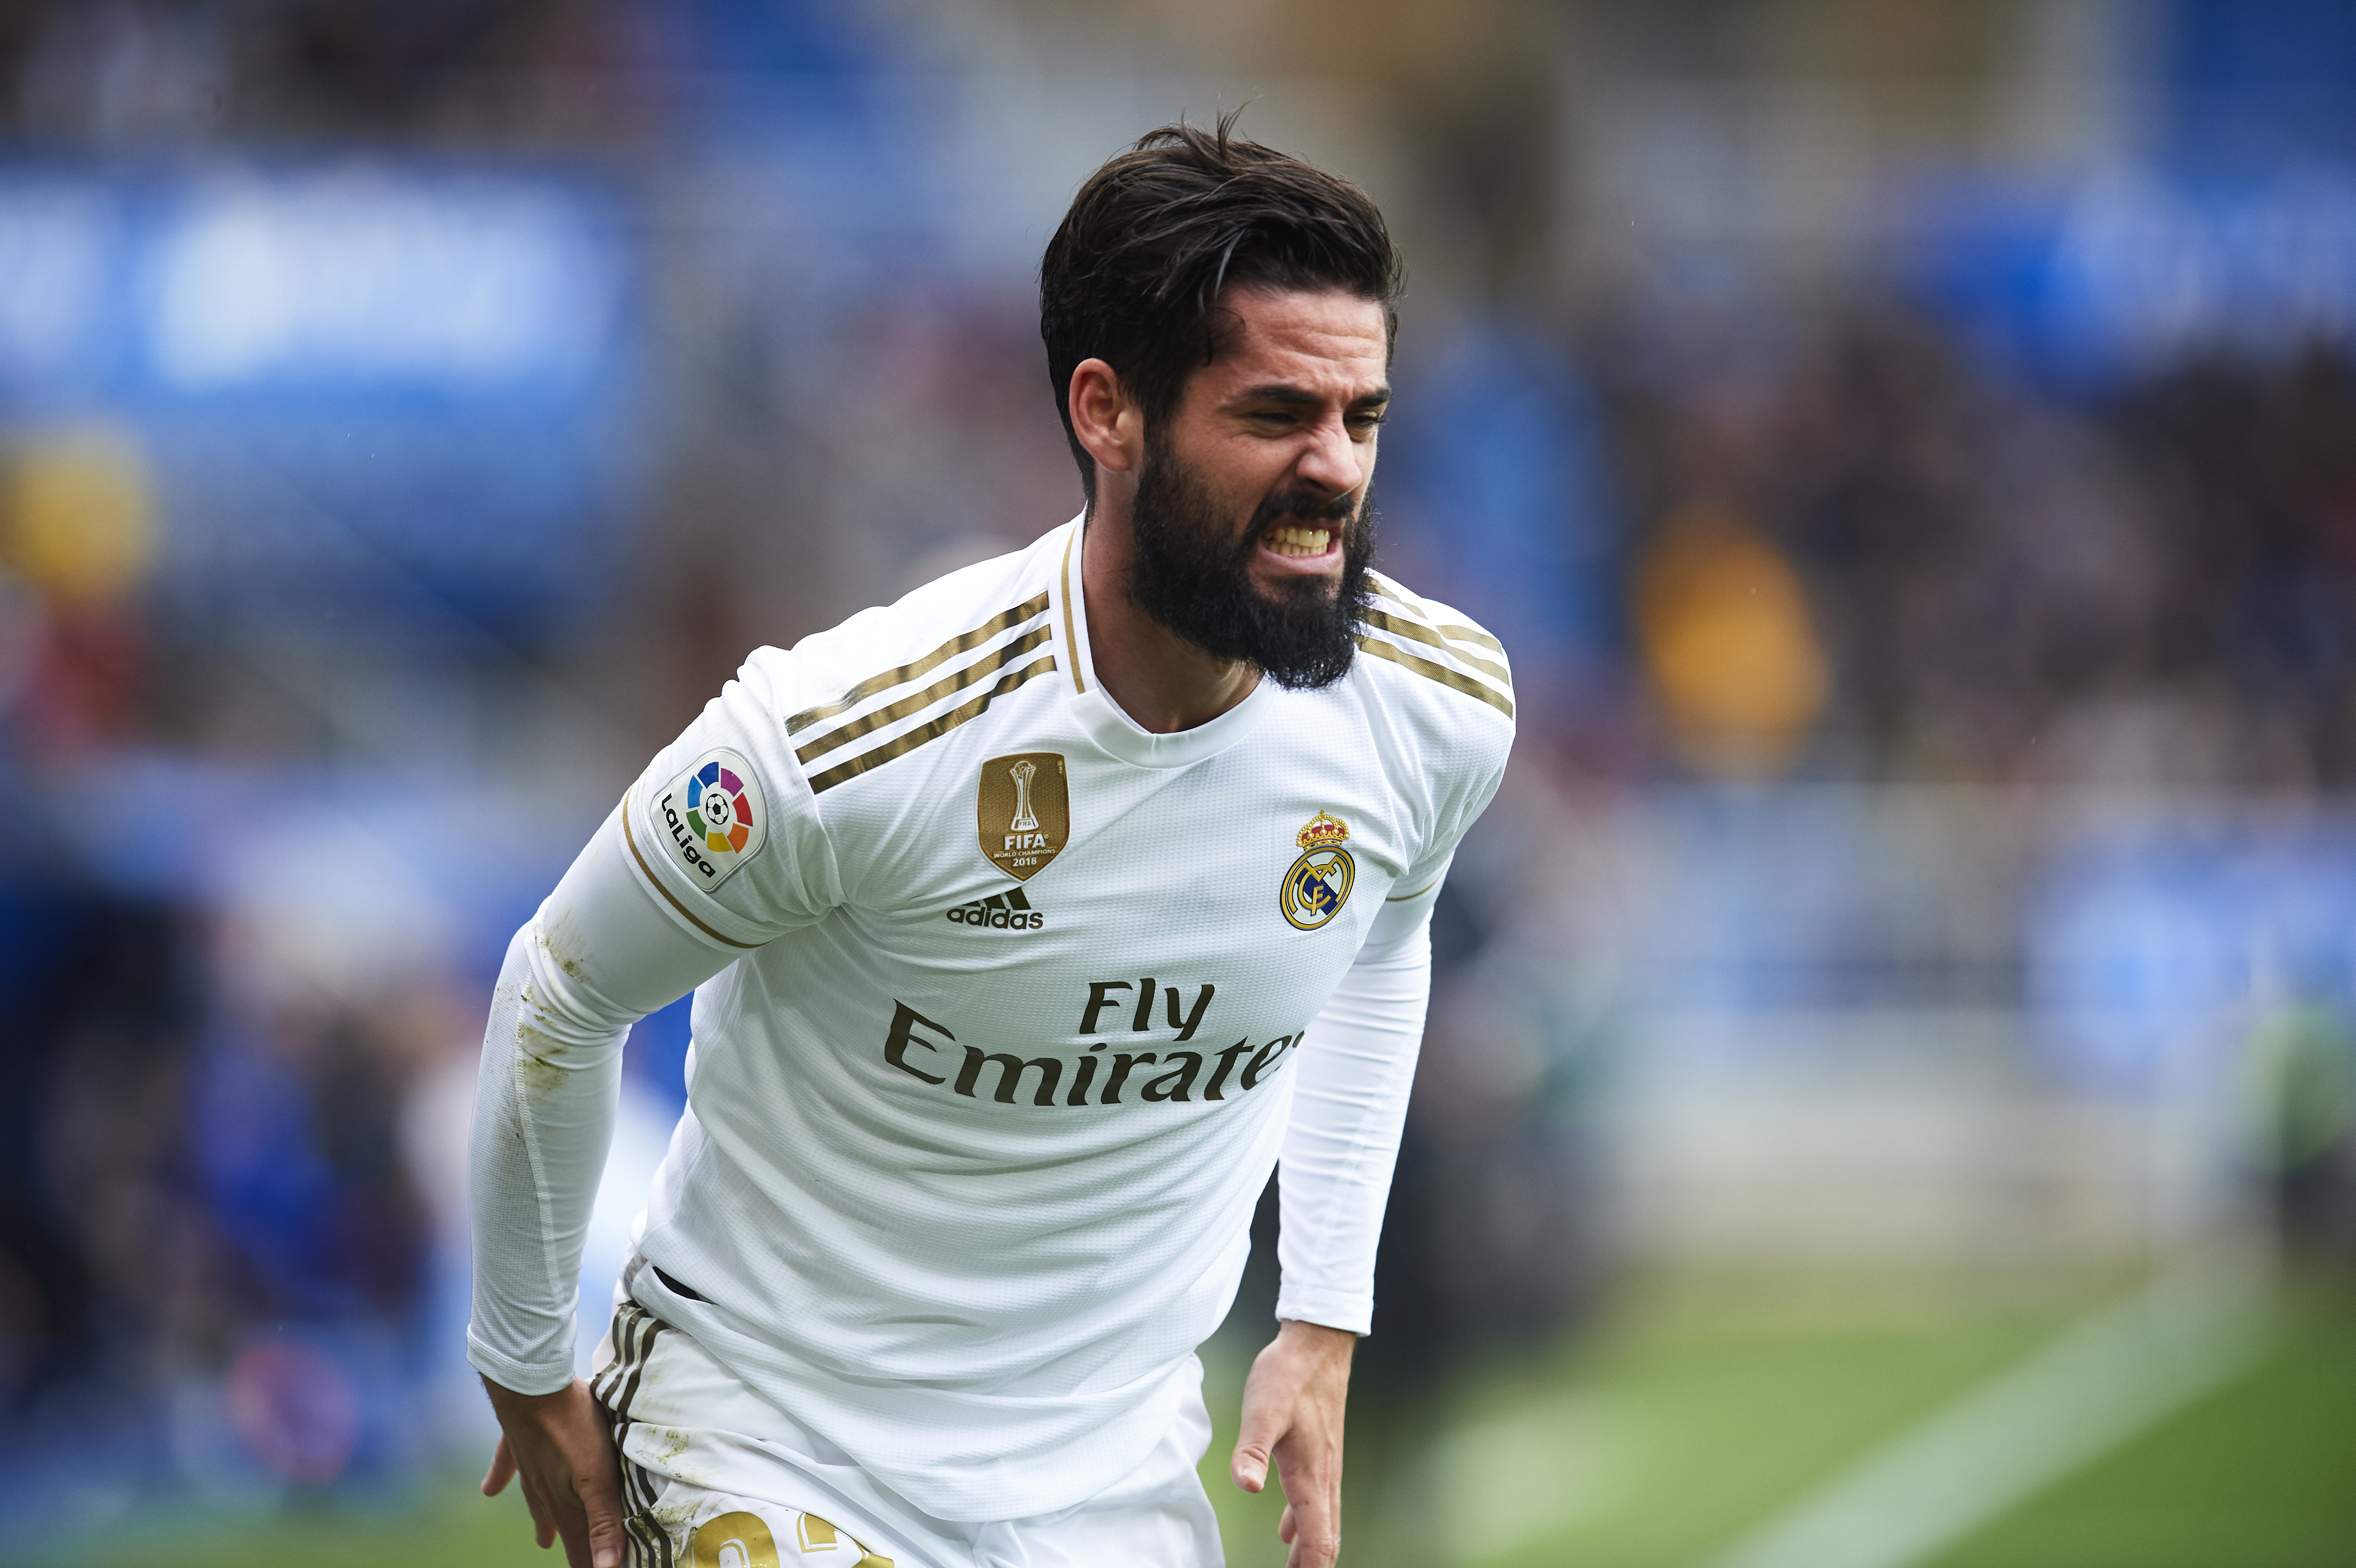 What next for Isco? (Photo by Juan Manuel Serrano Arce/Getty Images)